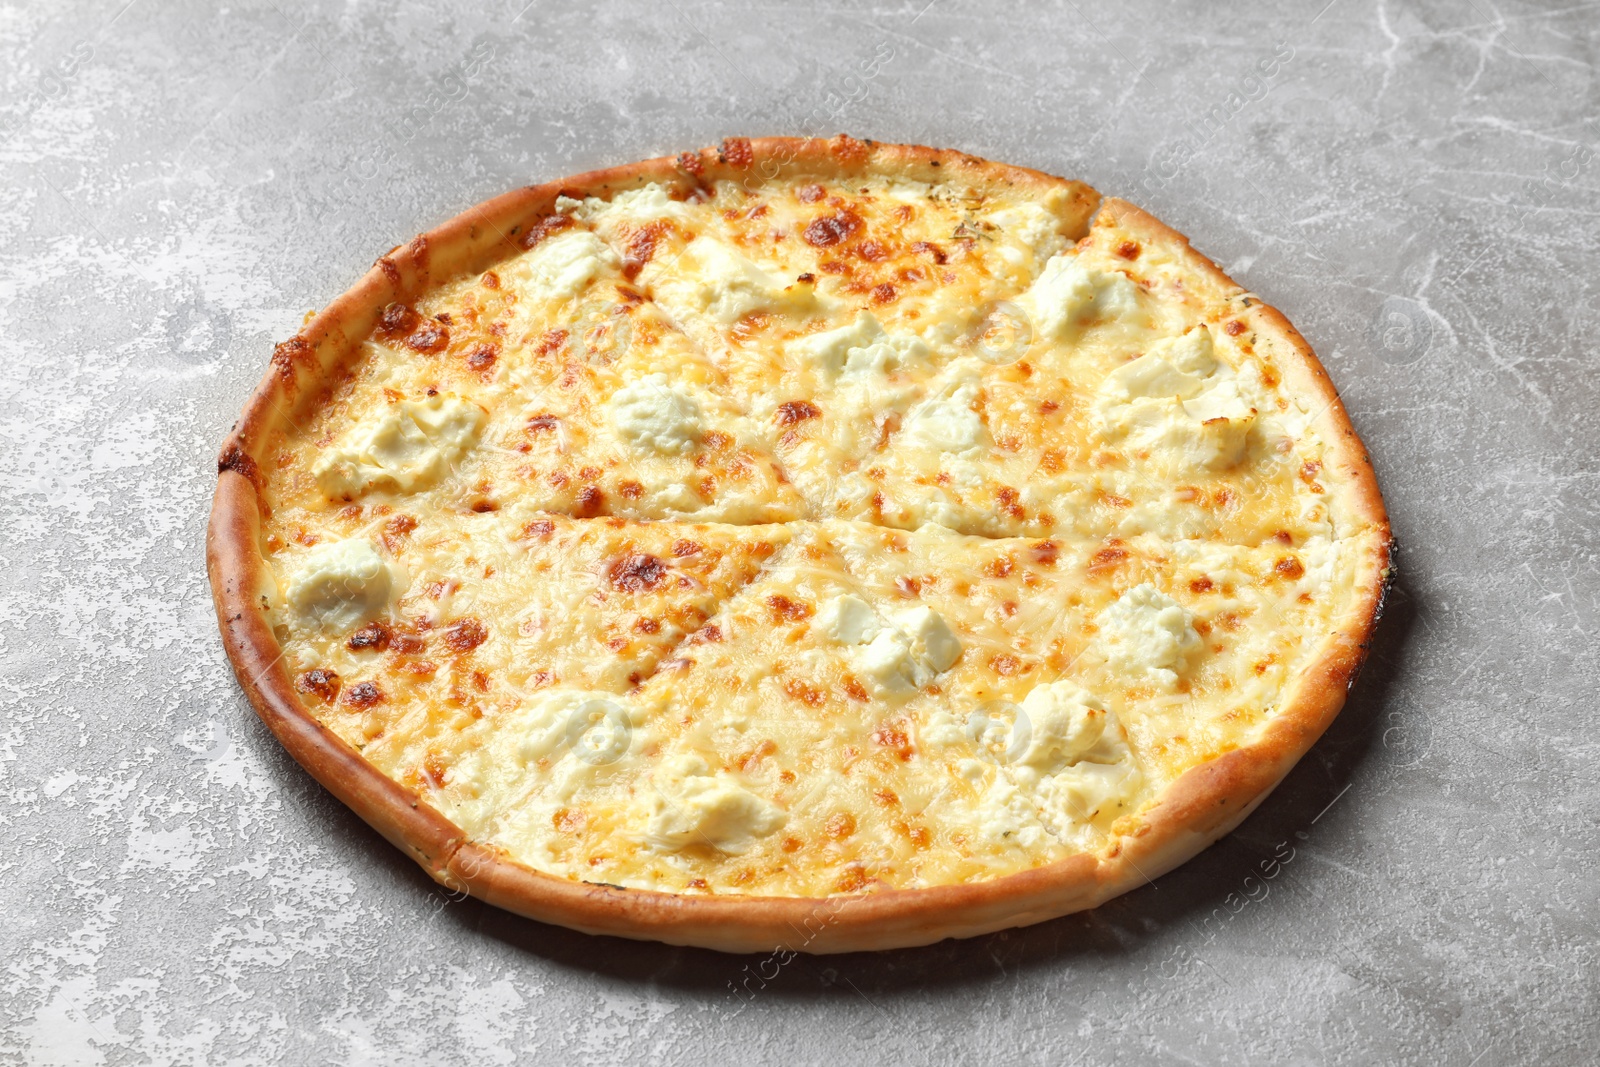 Photo of Delicious hot cheese pizza on grey background